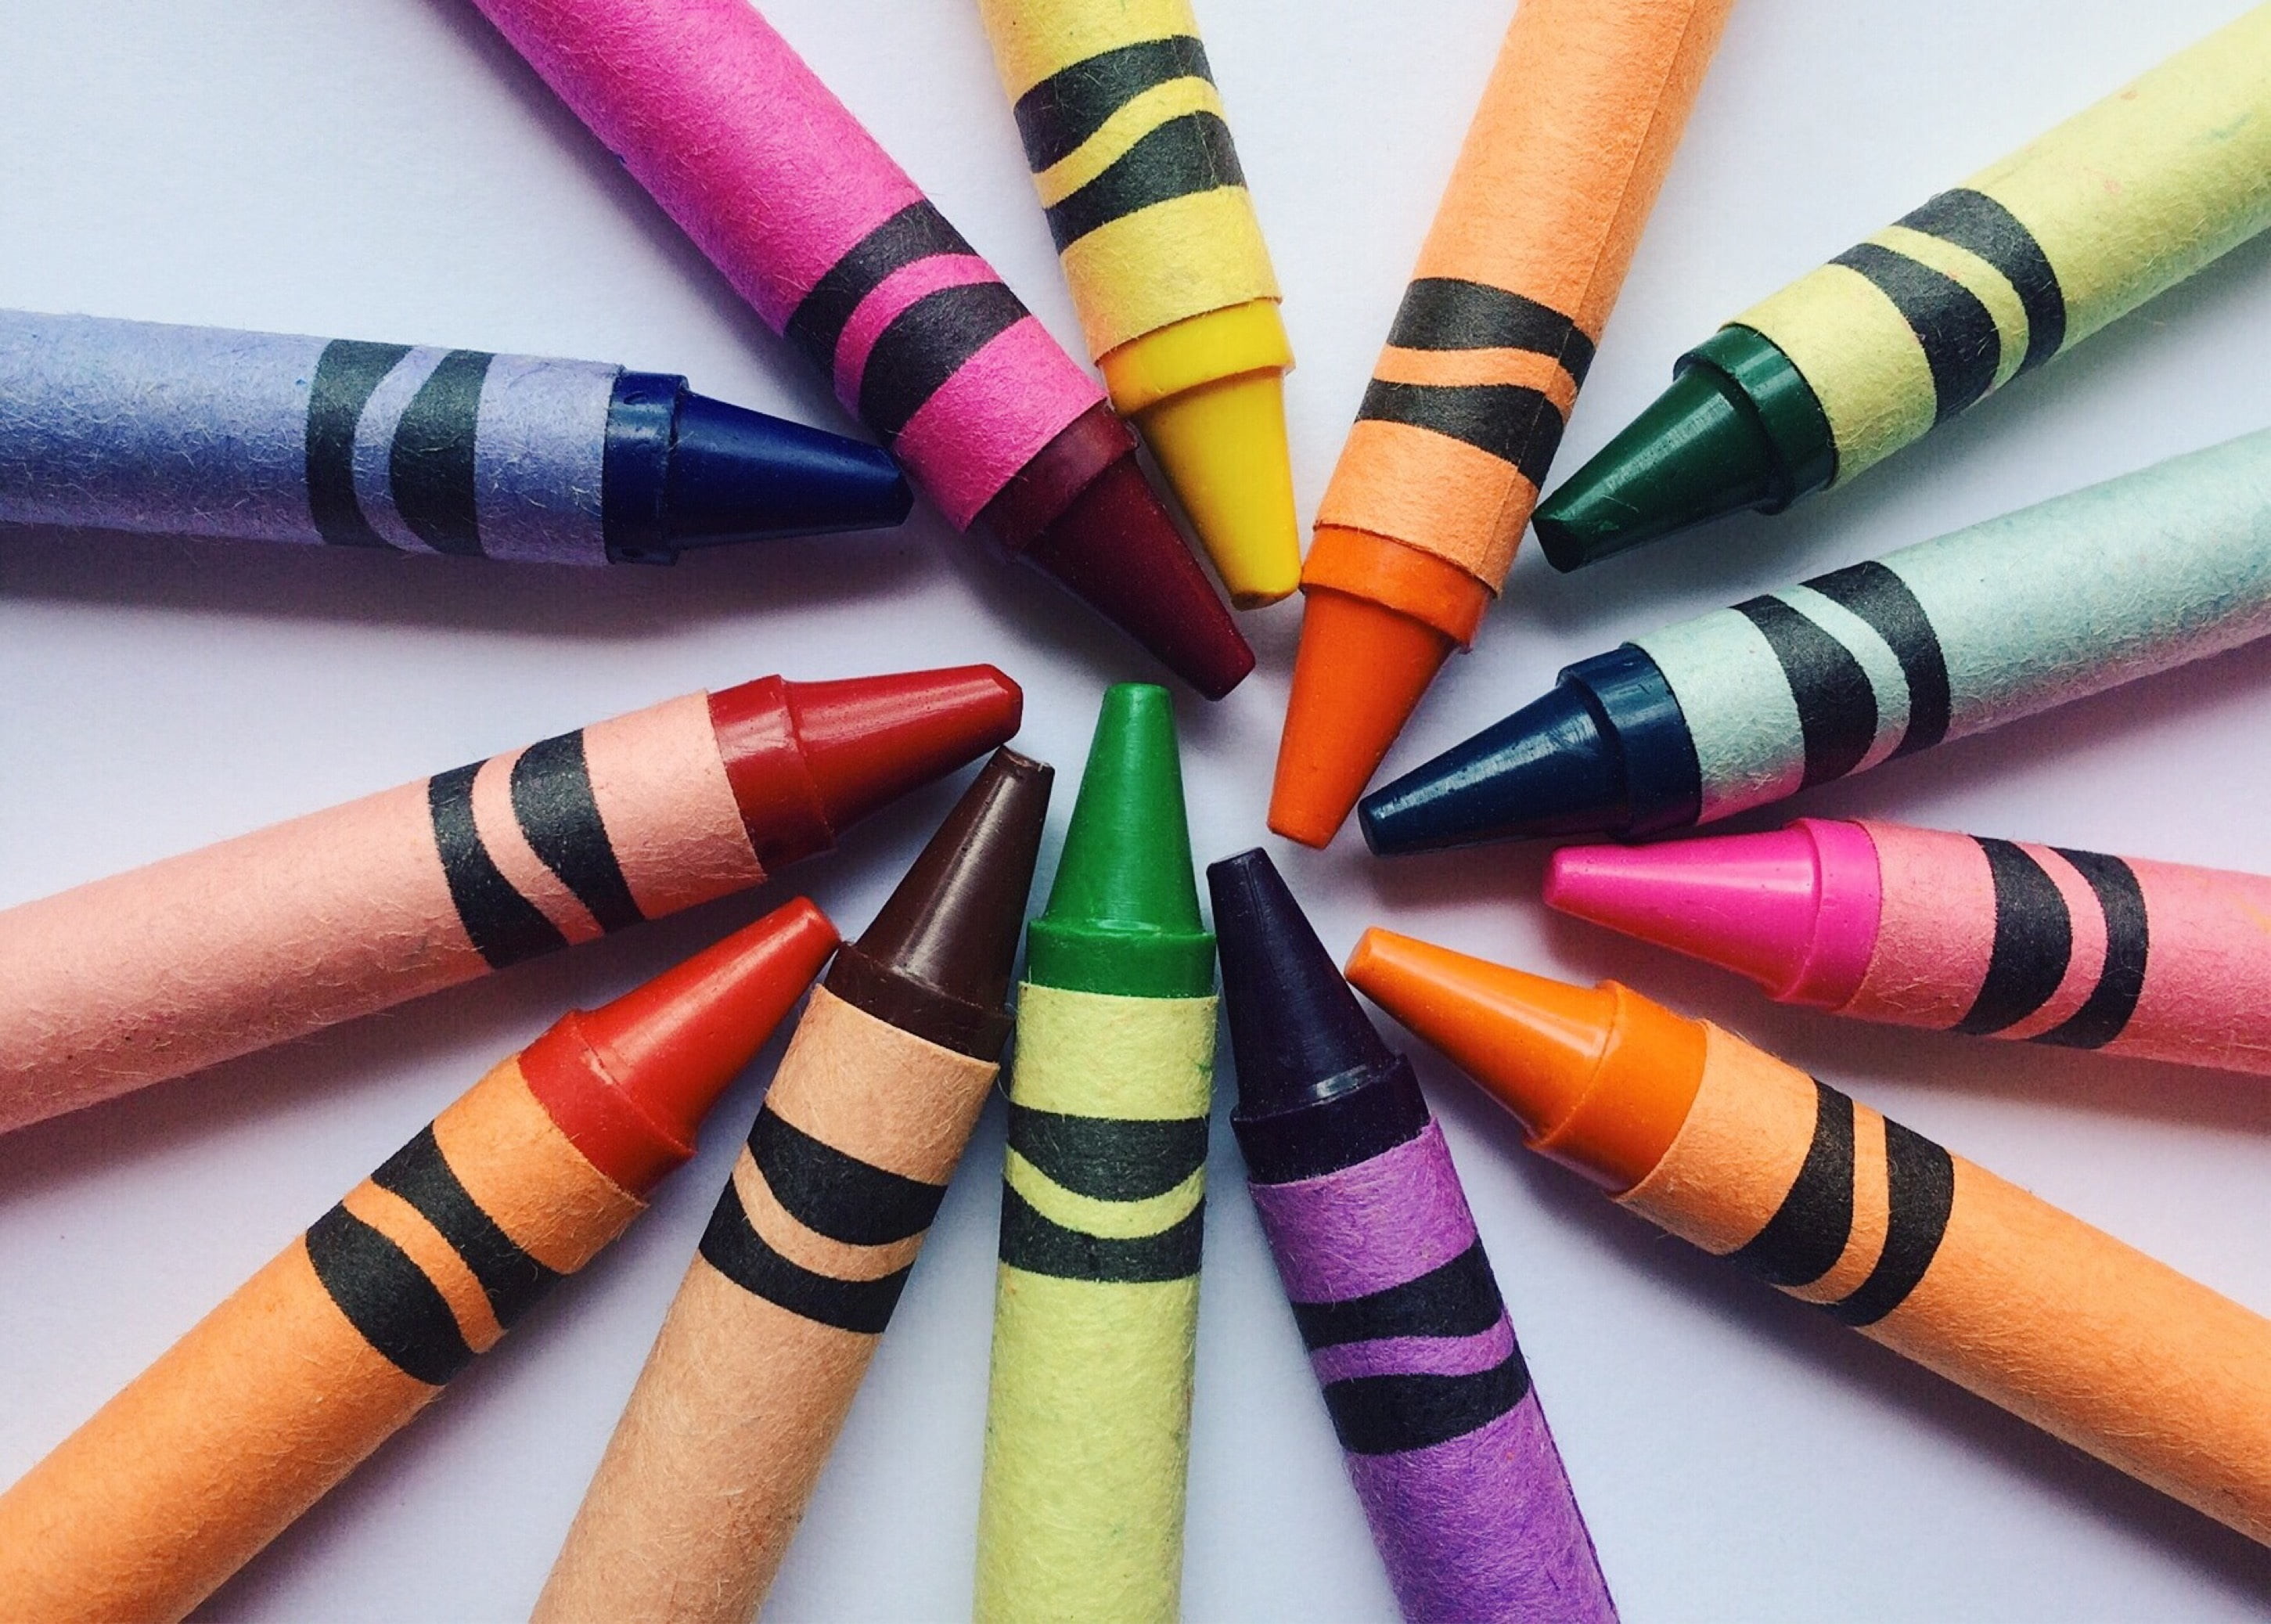 750 Crayon Pictures  Download Free Images on Unsplash